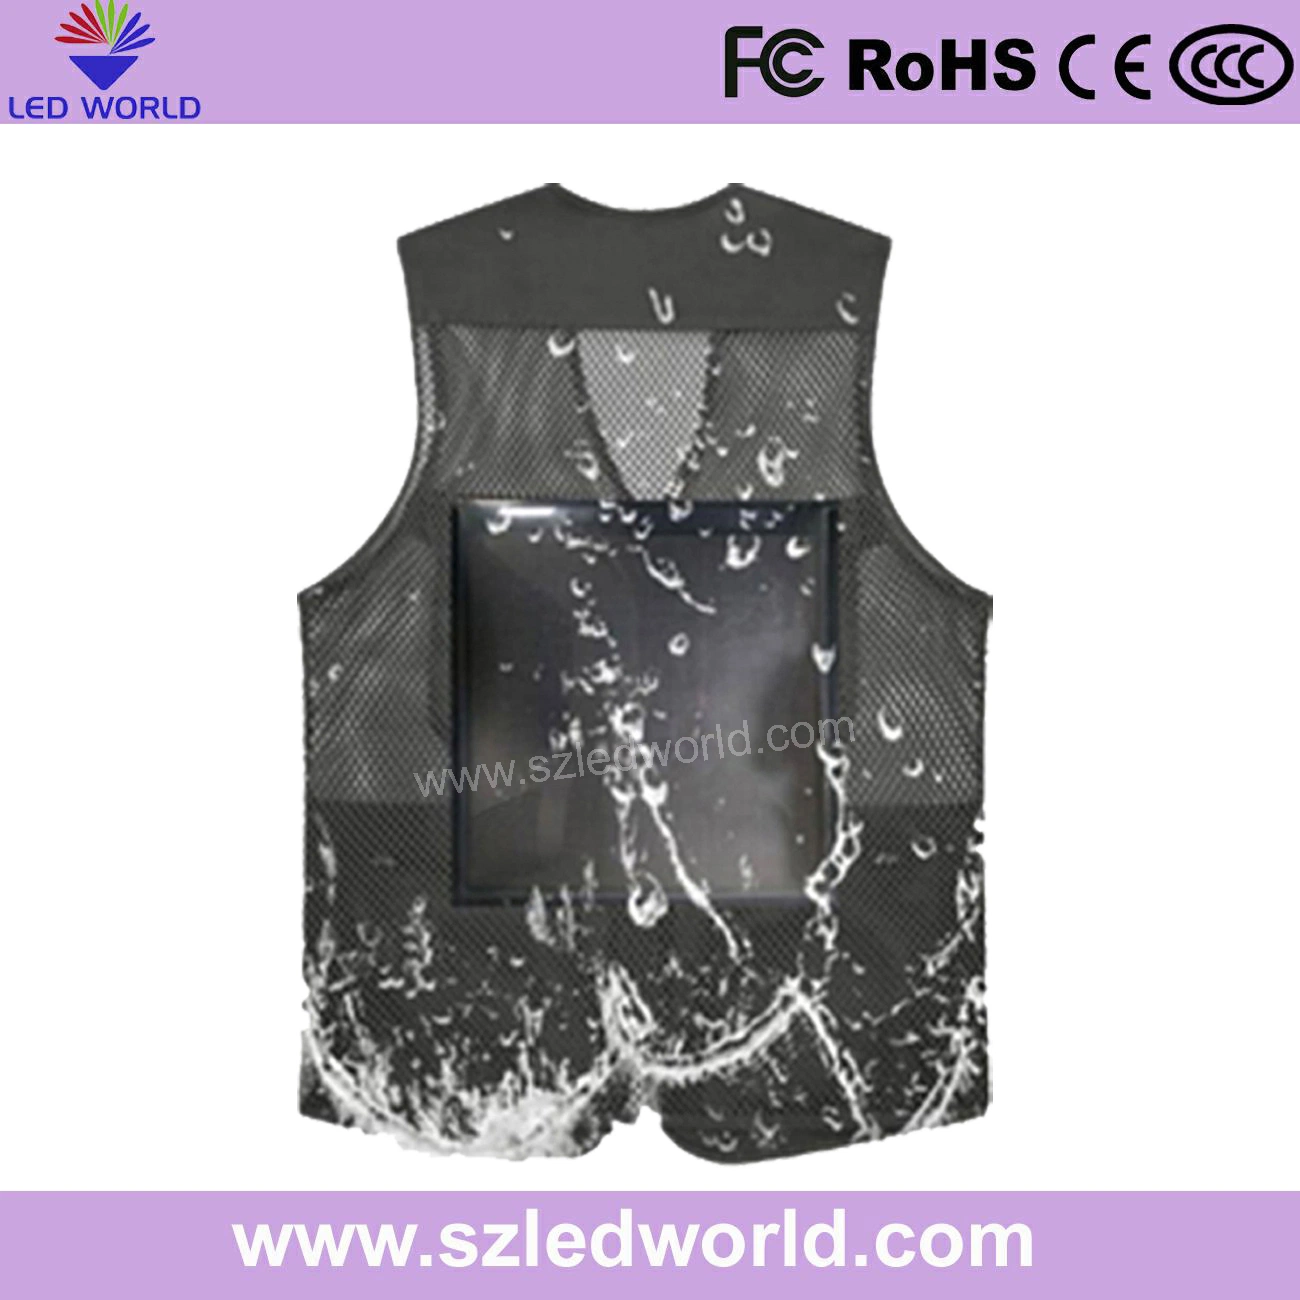 Convenient LED Vest Display in Any Clothes or Backpack for Fashion or Advertising